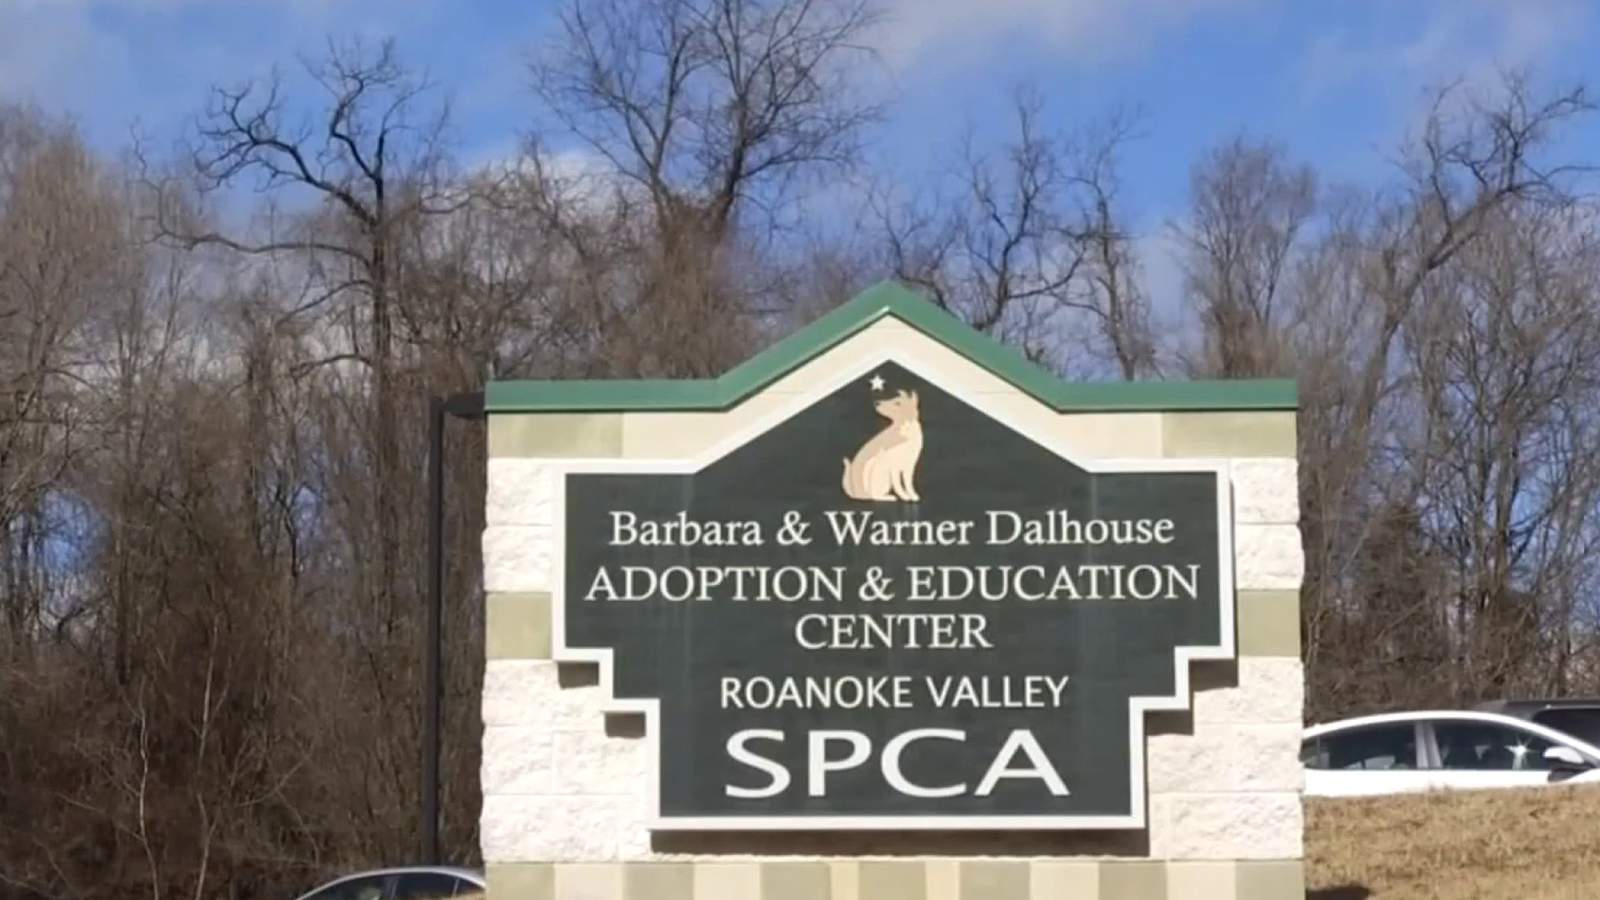 Roanoke Valley SPCA expands annual fundraiser to help more pets in need